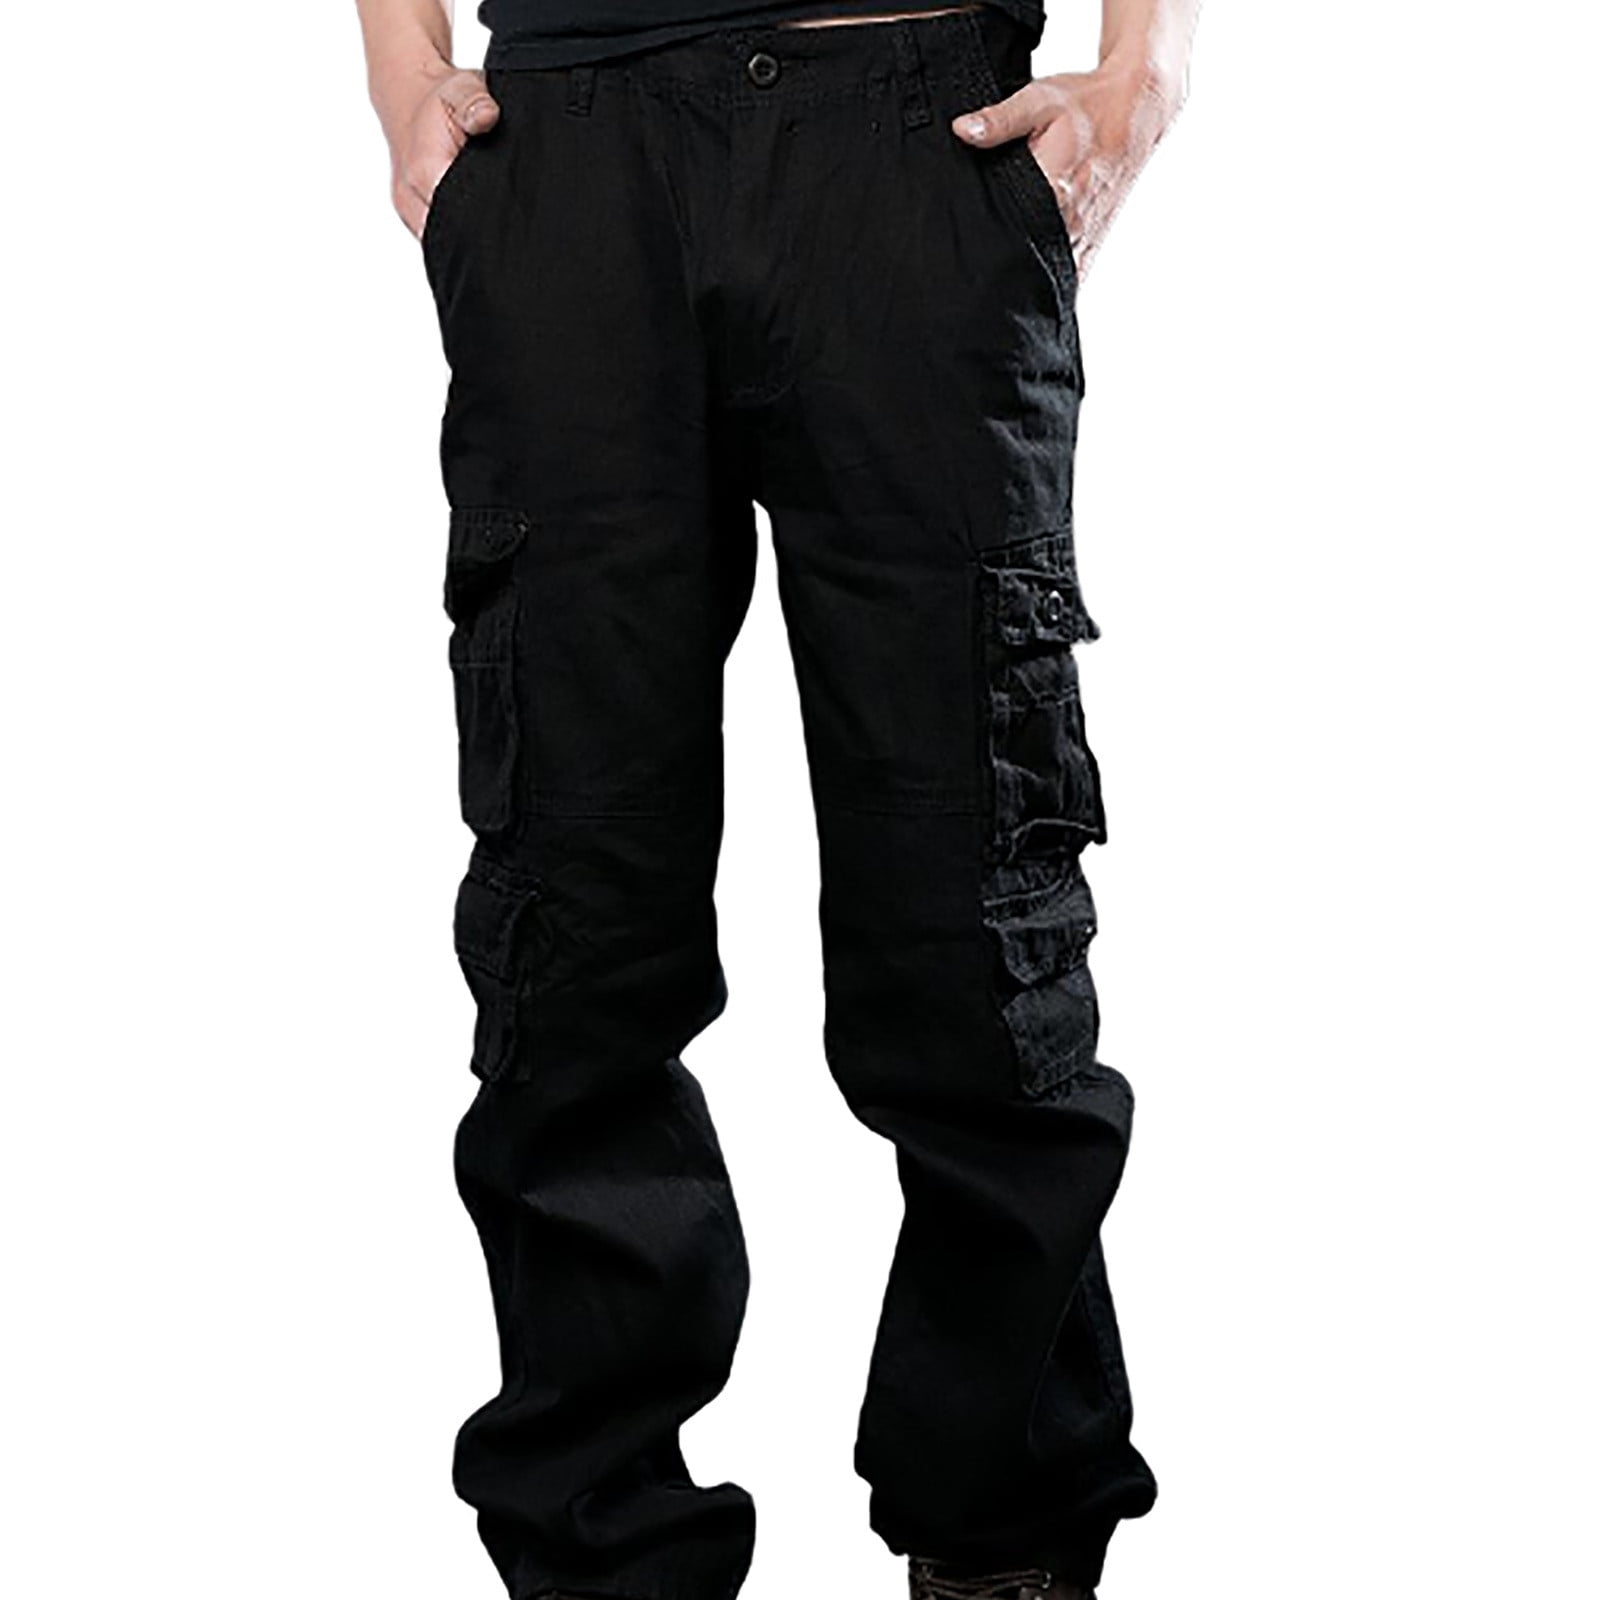 symoid Mens Cargo Pants- Trousers Multi-pocket Overalls Loose Casual ...